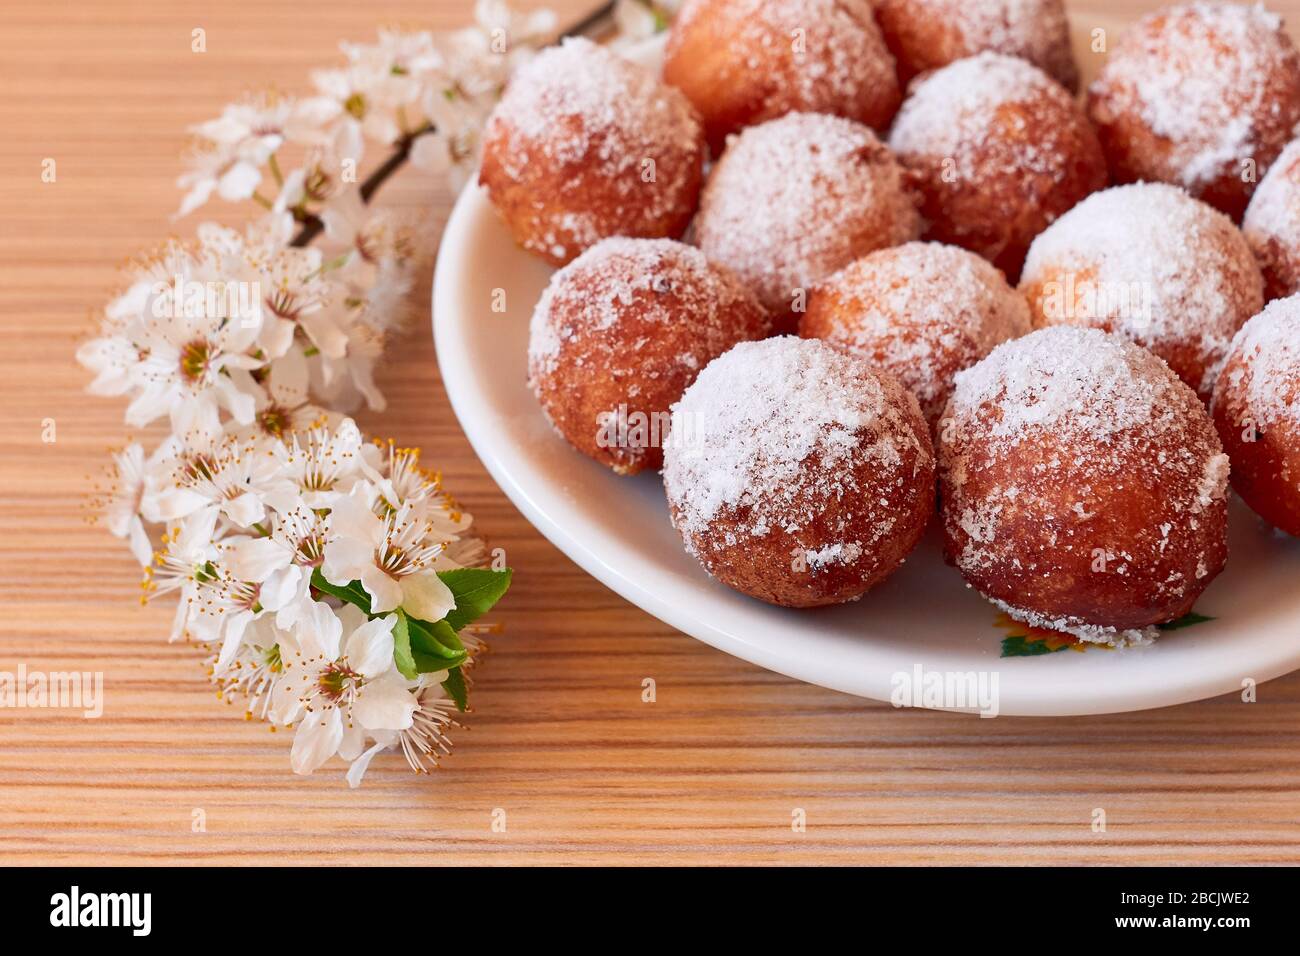 Homemade donut holes with a blooming brach on desk , during pandemic isolation Stock Photo